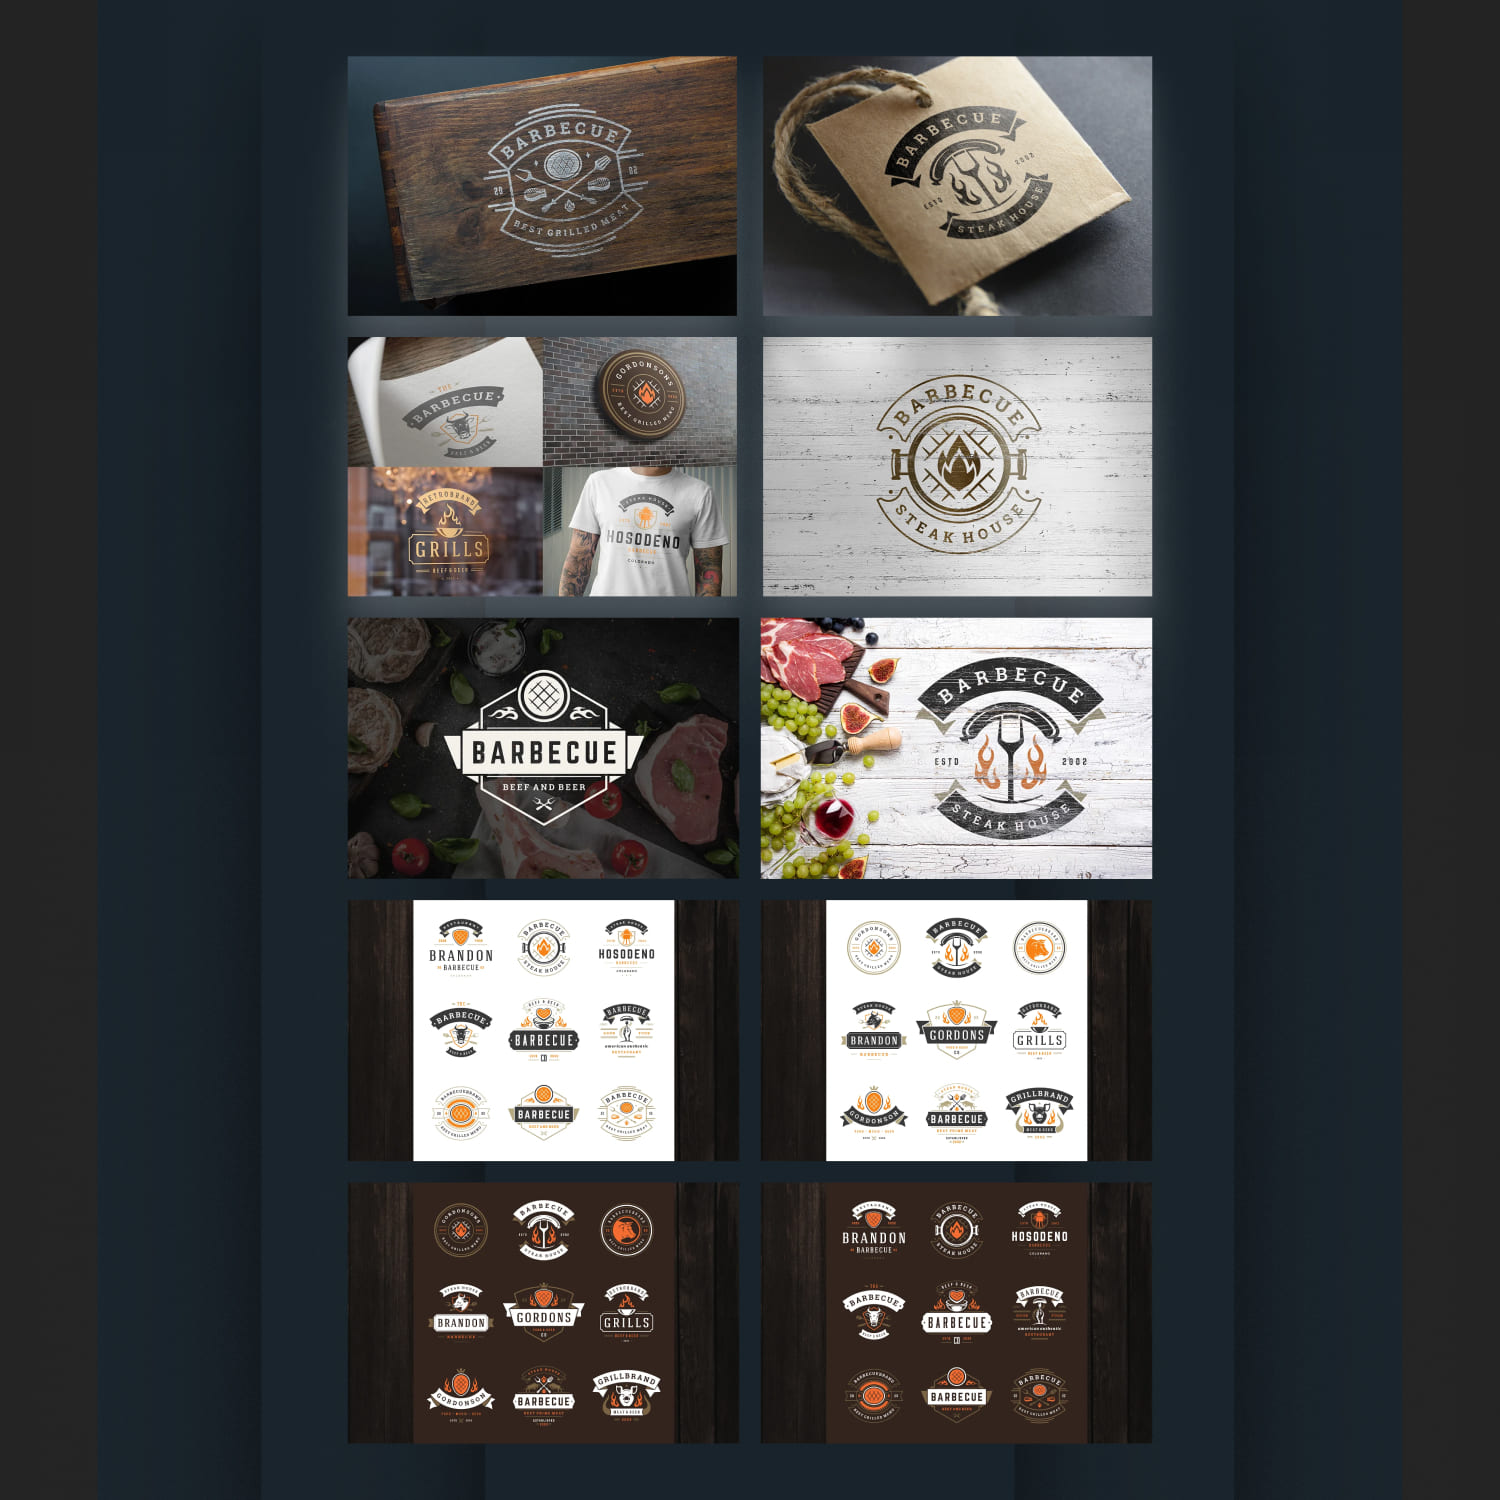 18 Barbecue Logos and Badges cover.